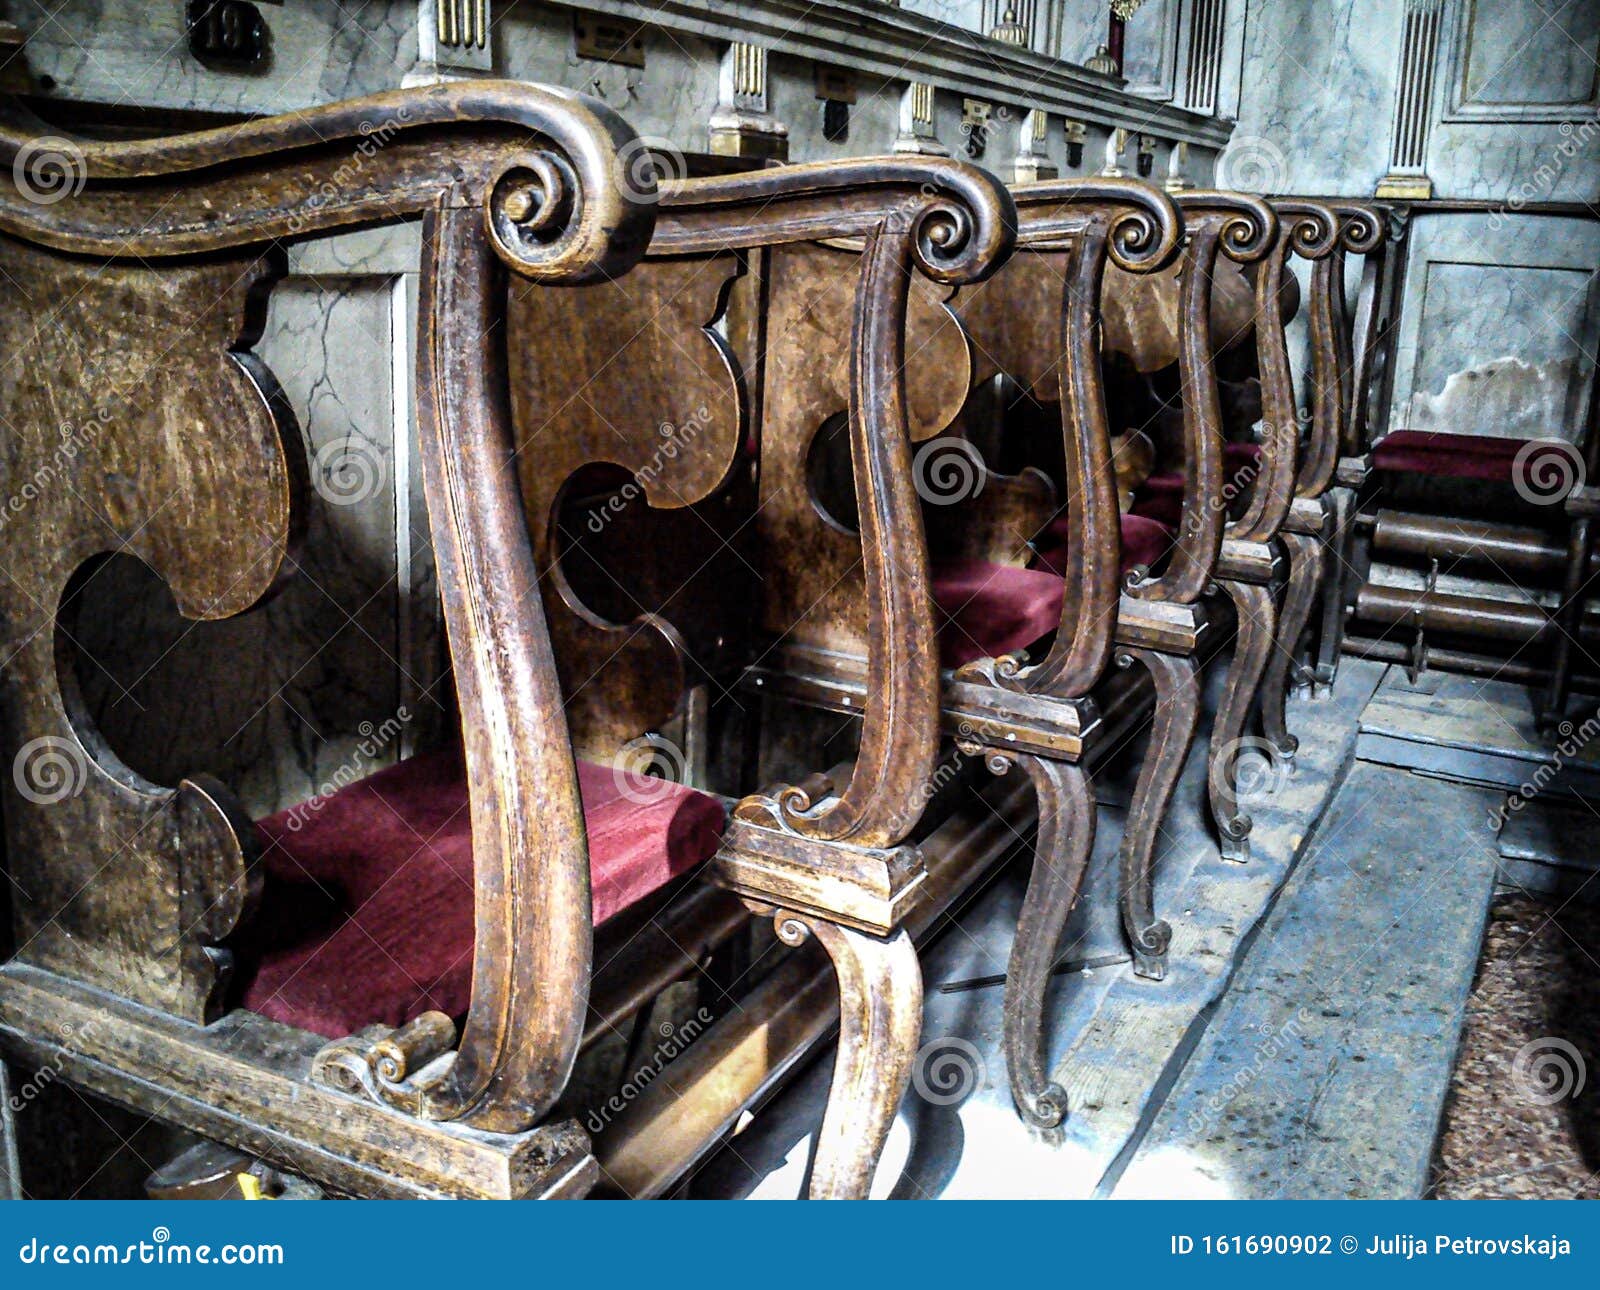 Church Chairs Or Benches Inside A Church The Chairs Are Decorated